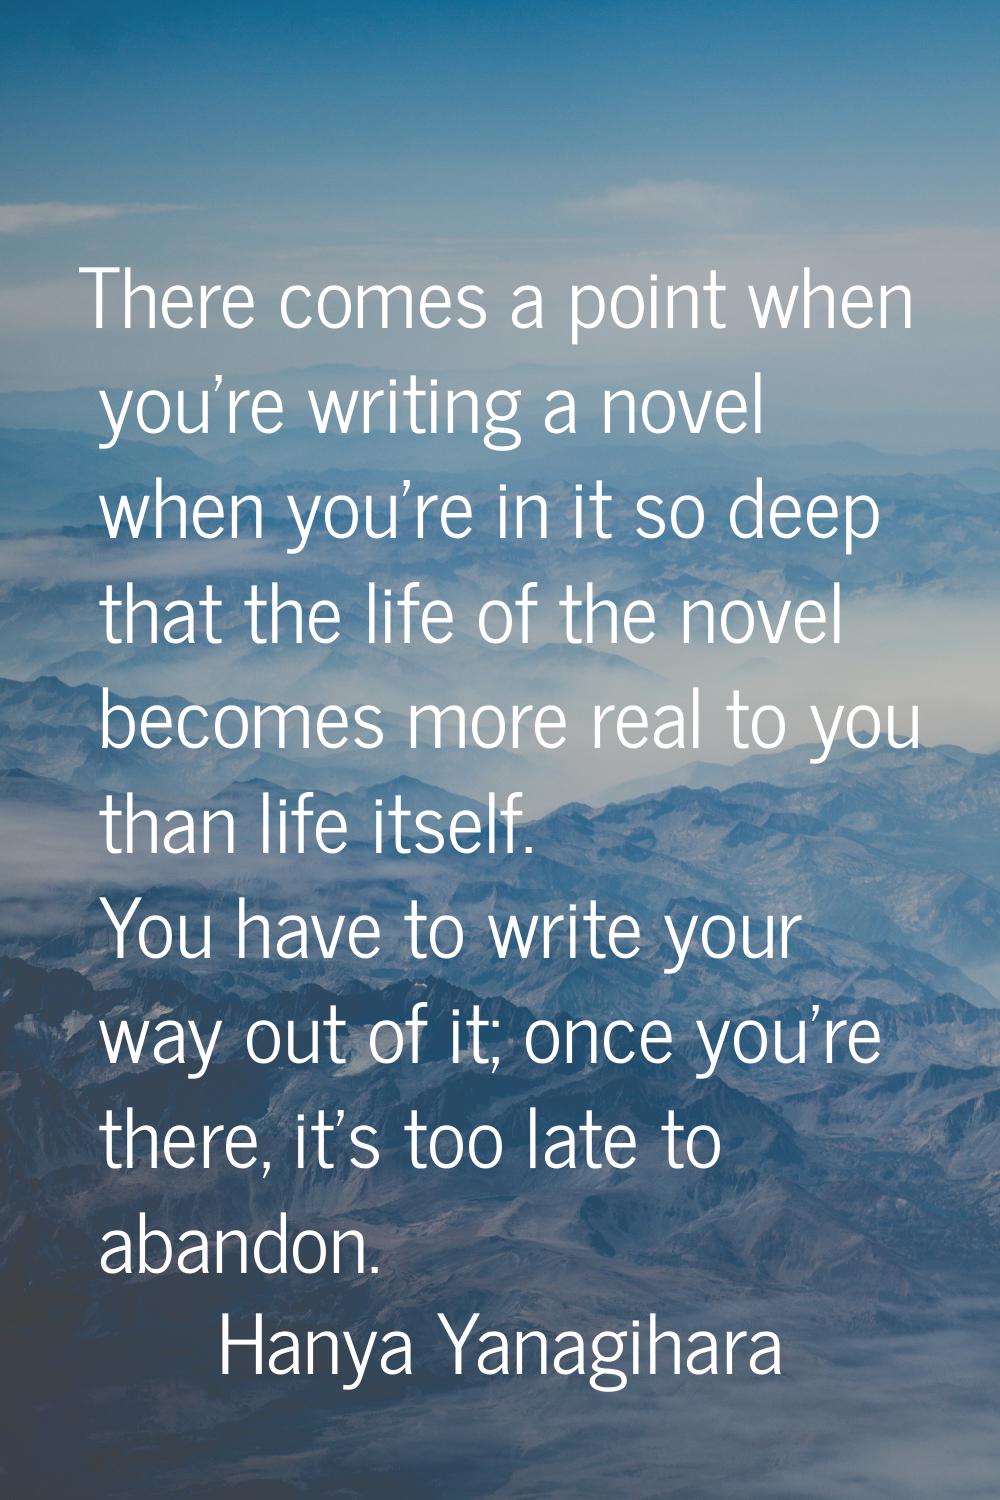 There comes a point when you're writing a novel when you're in it so deep that the life of the nove